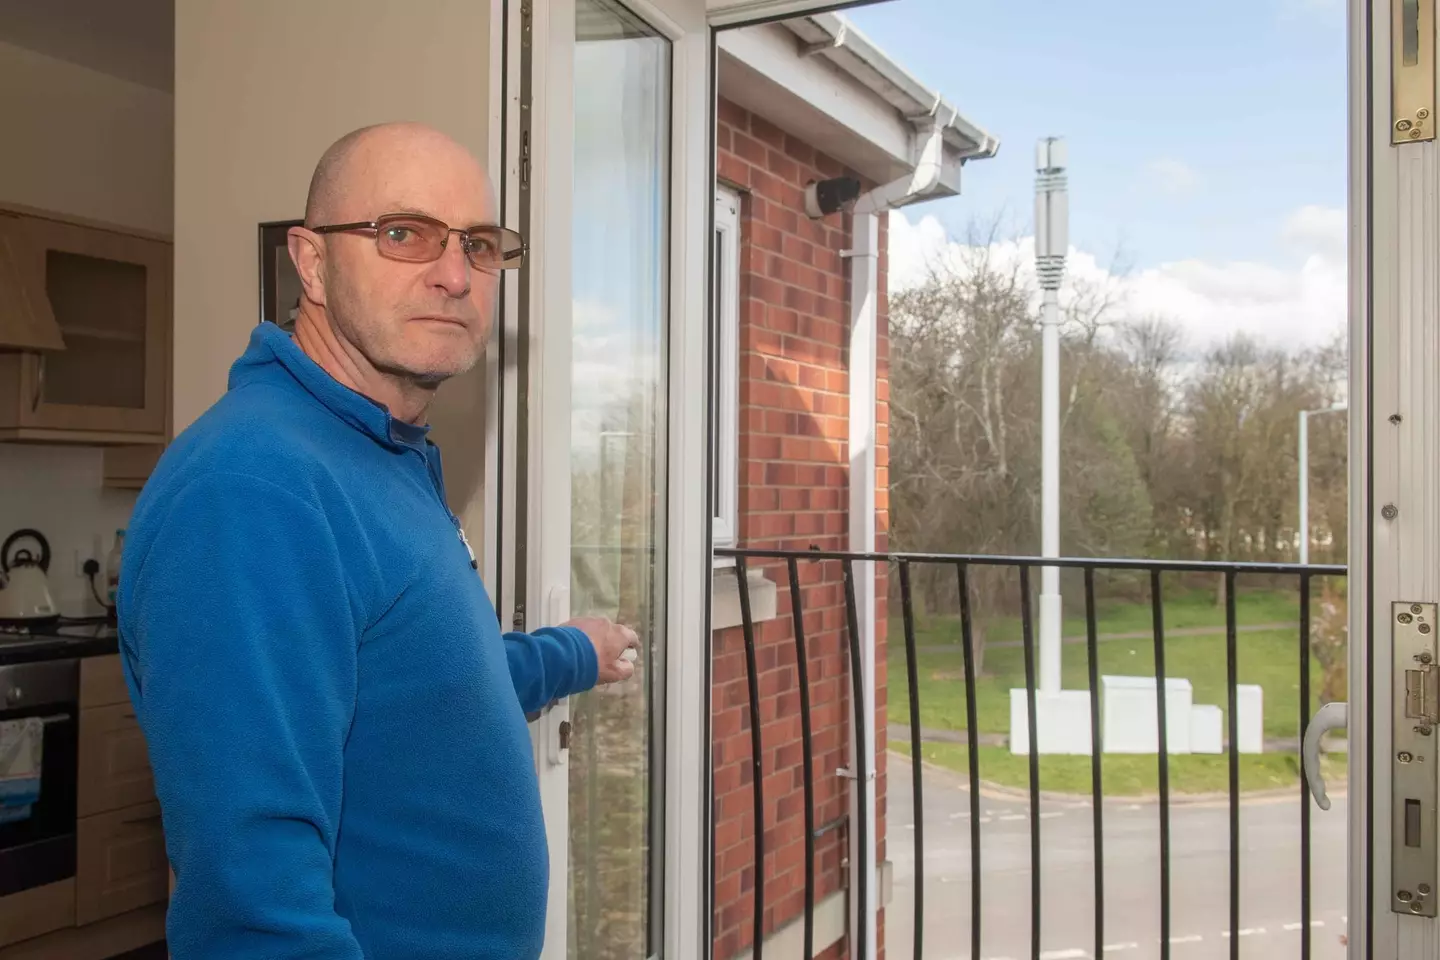 Homeowner Brian Swanson is furious at the 'eyesore' erected outside his flat.